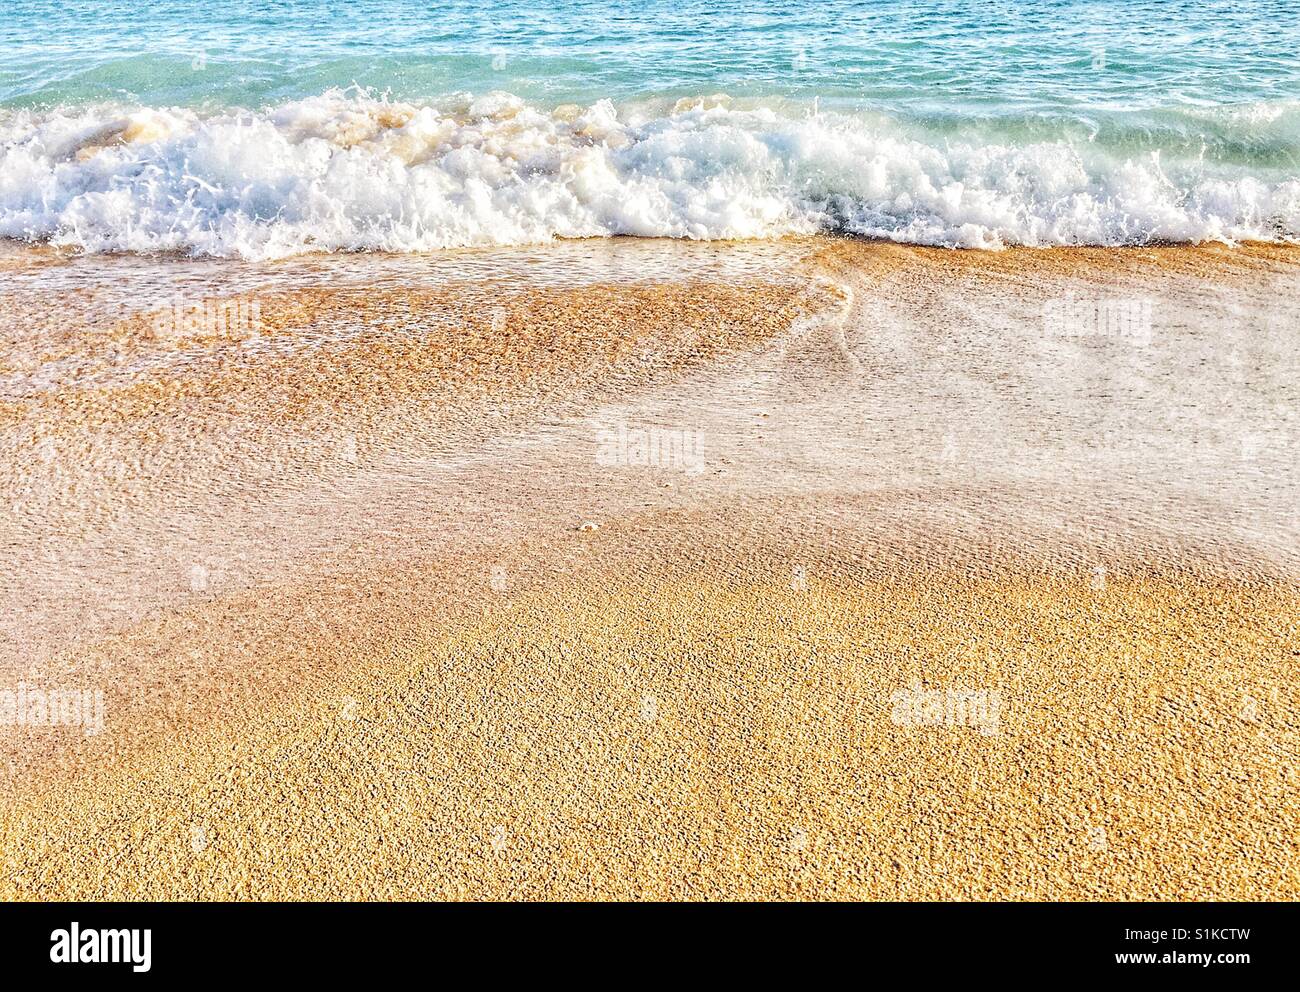 Coastal beach landscape of waves on the sand. Low angle with sand in low 2/3 looking out to sea Stock Photo